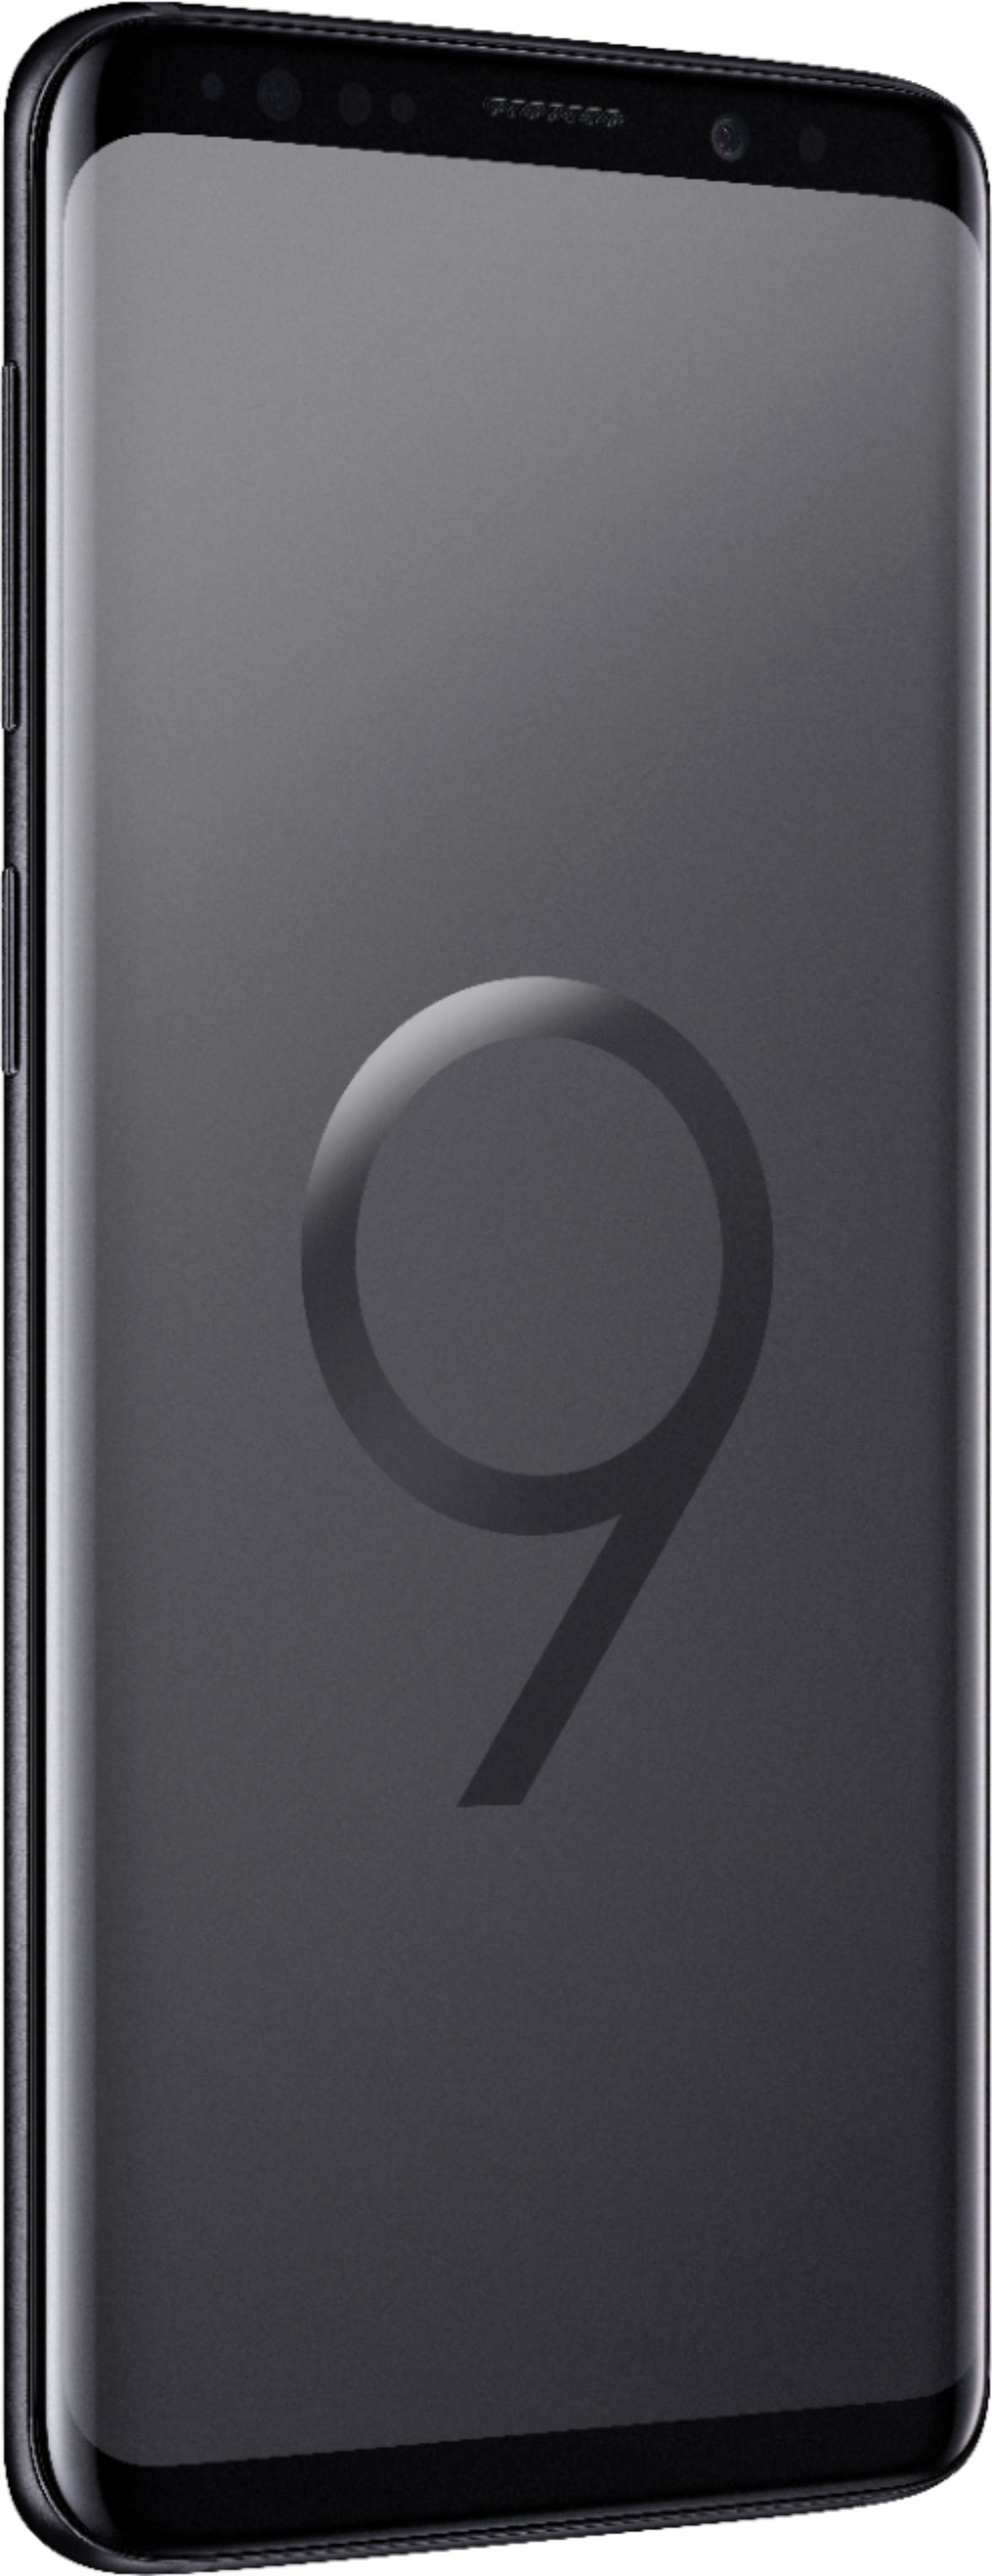 Best Buy: Samsung Galaxy S9 with 128GB Memory Cell Phone (Unlocked 